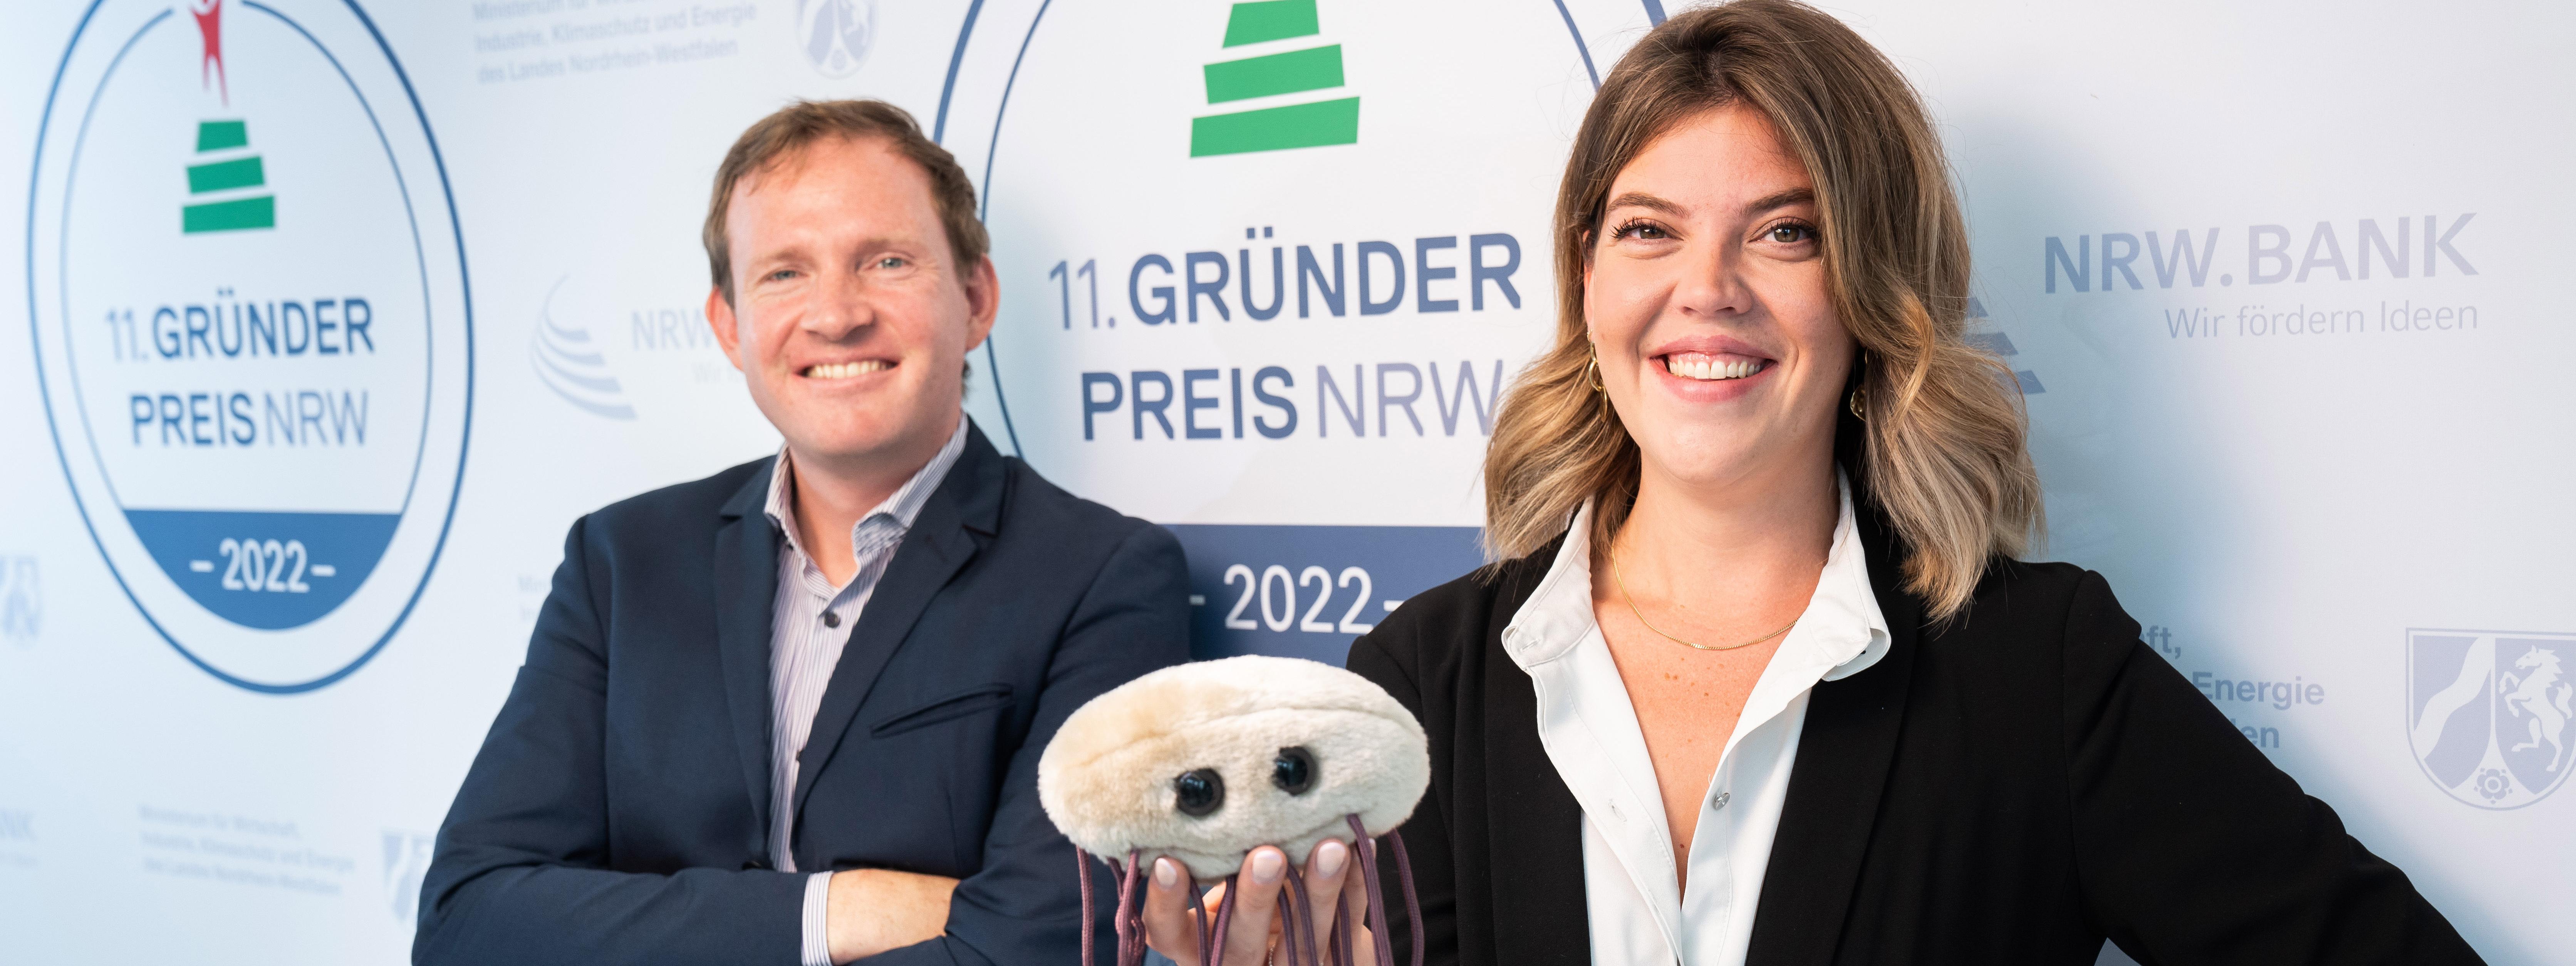 Dr Christian Schwarz, founder of Numaferm, and a woman standing in front of the Gründerpreis logo